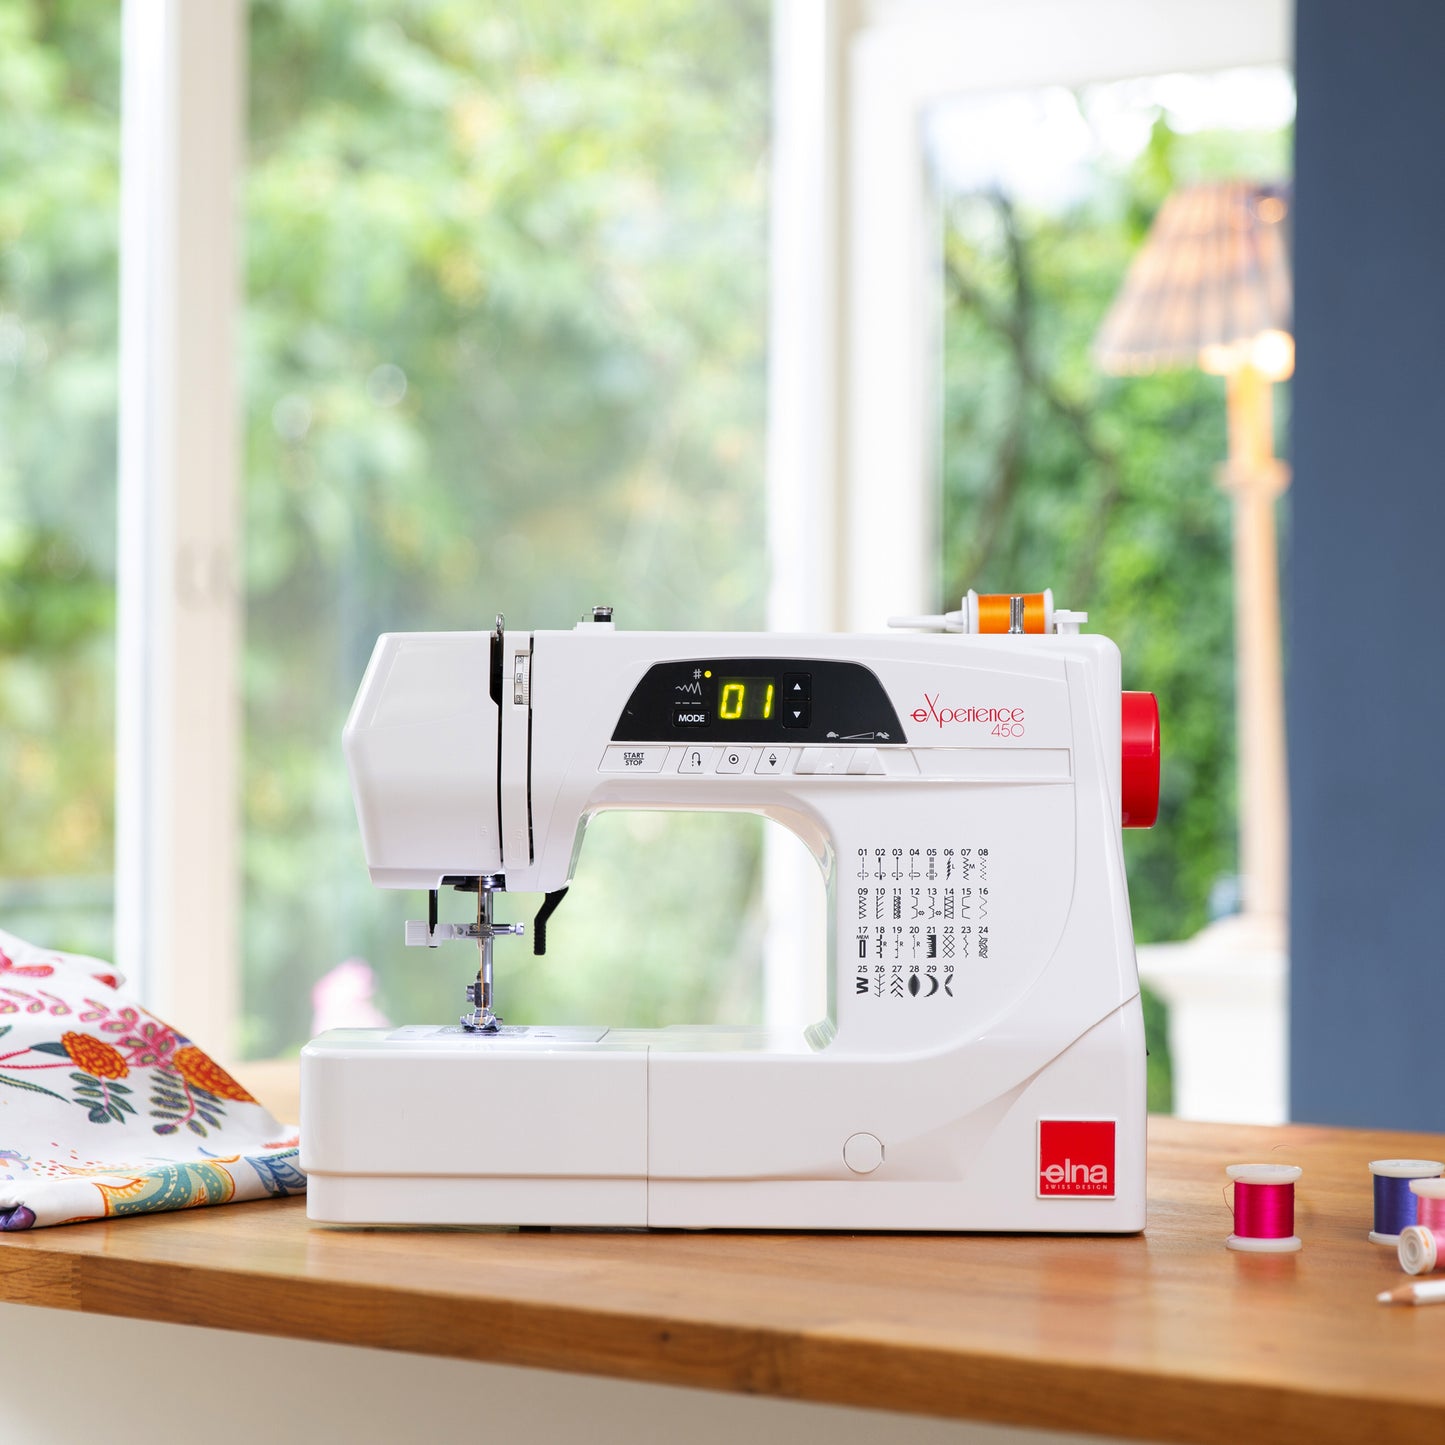 Elna Experience 450 Sewing Machine 2 Hour Use